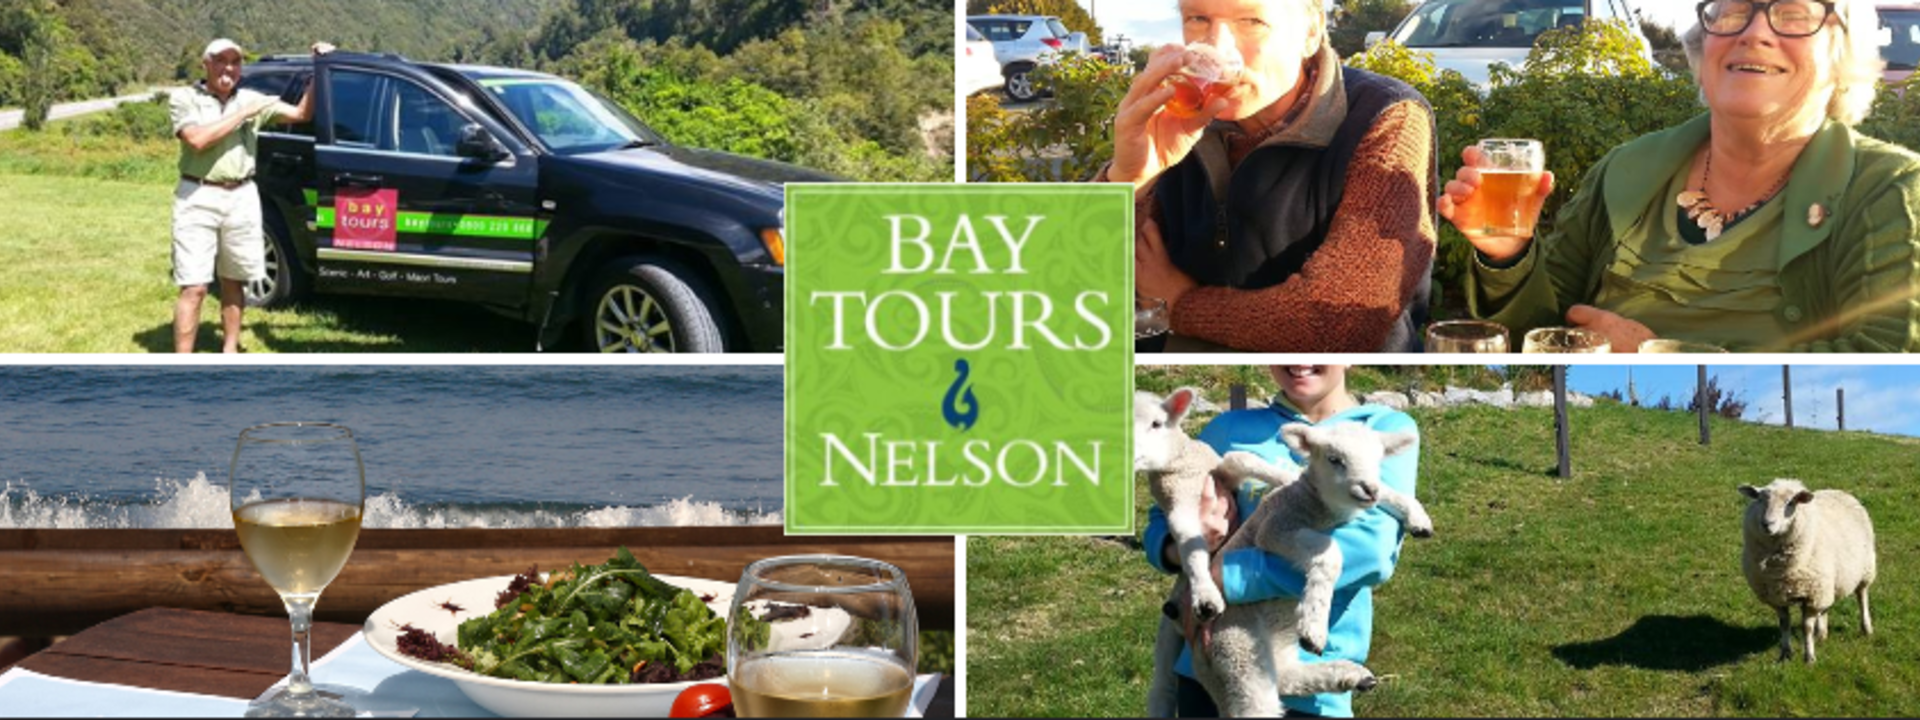 Logo: Bay Tours Nelson -Tours of the Nelson Region